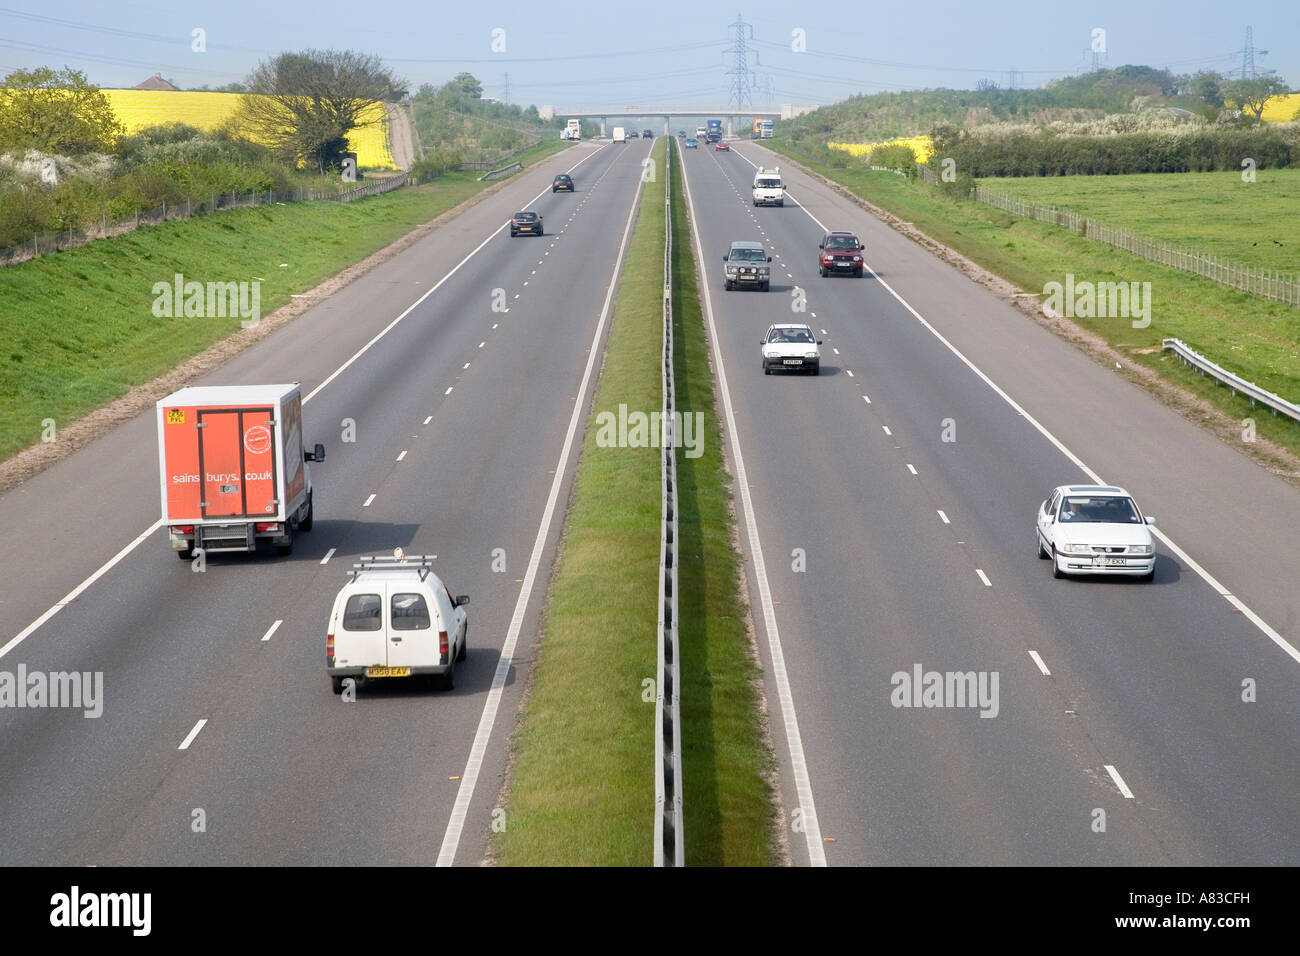 THE A130 ROAD VIEWED FROM ST PETERS WAY FOOTBRIDGE, NEAR CHELMSFORD, ESSEX,ENGLAND. Stock Photo